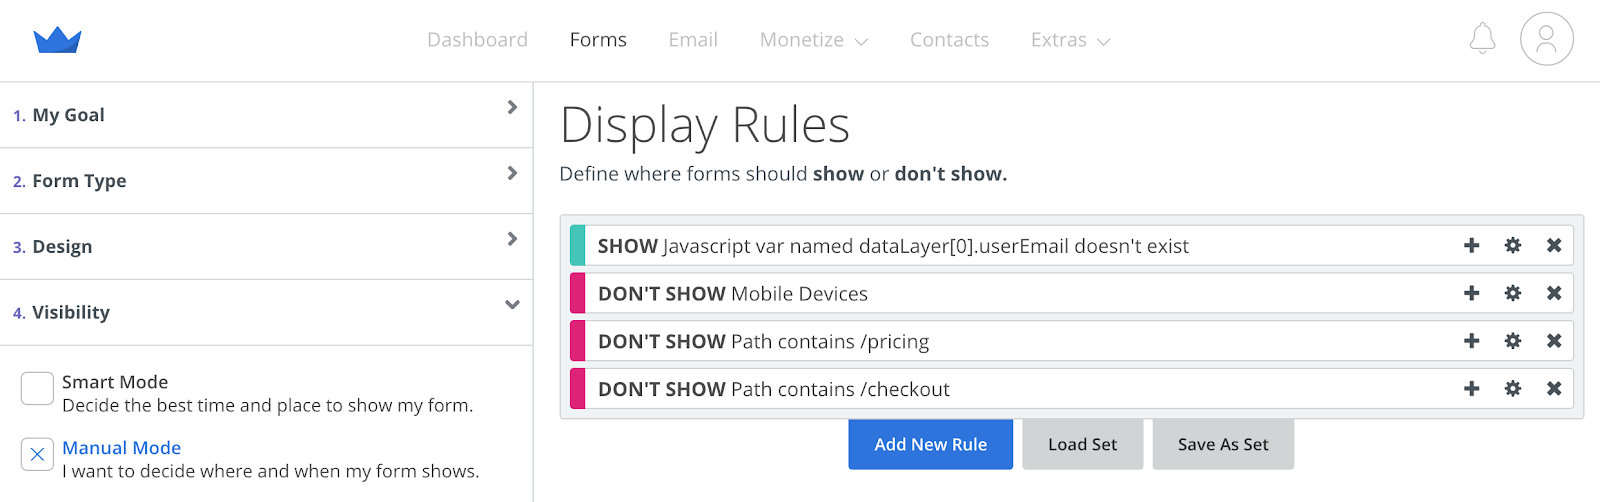 Screenshot of Display Rules for Welcome Mat